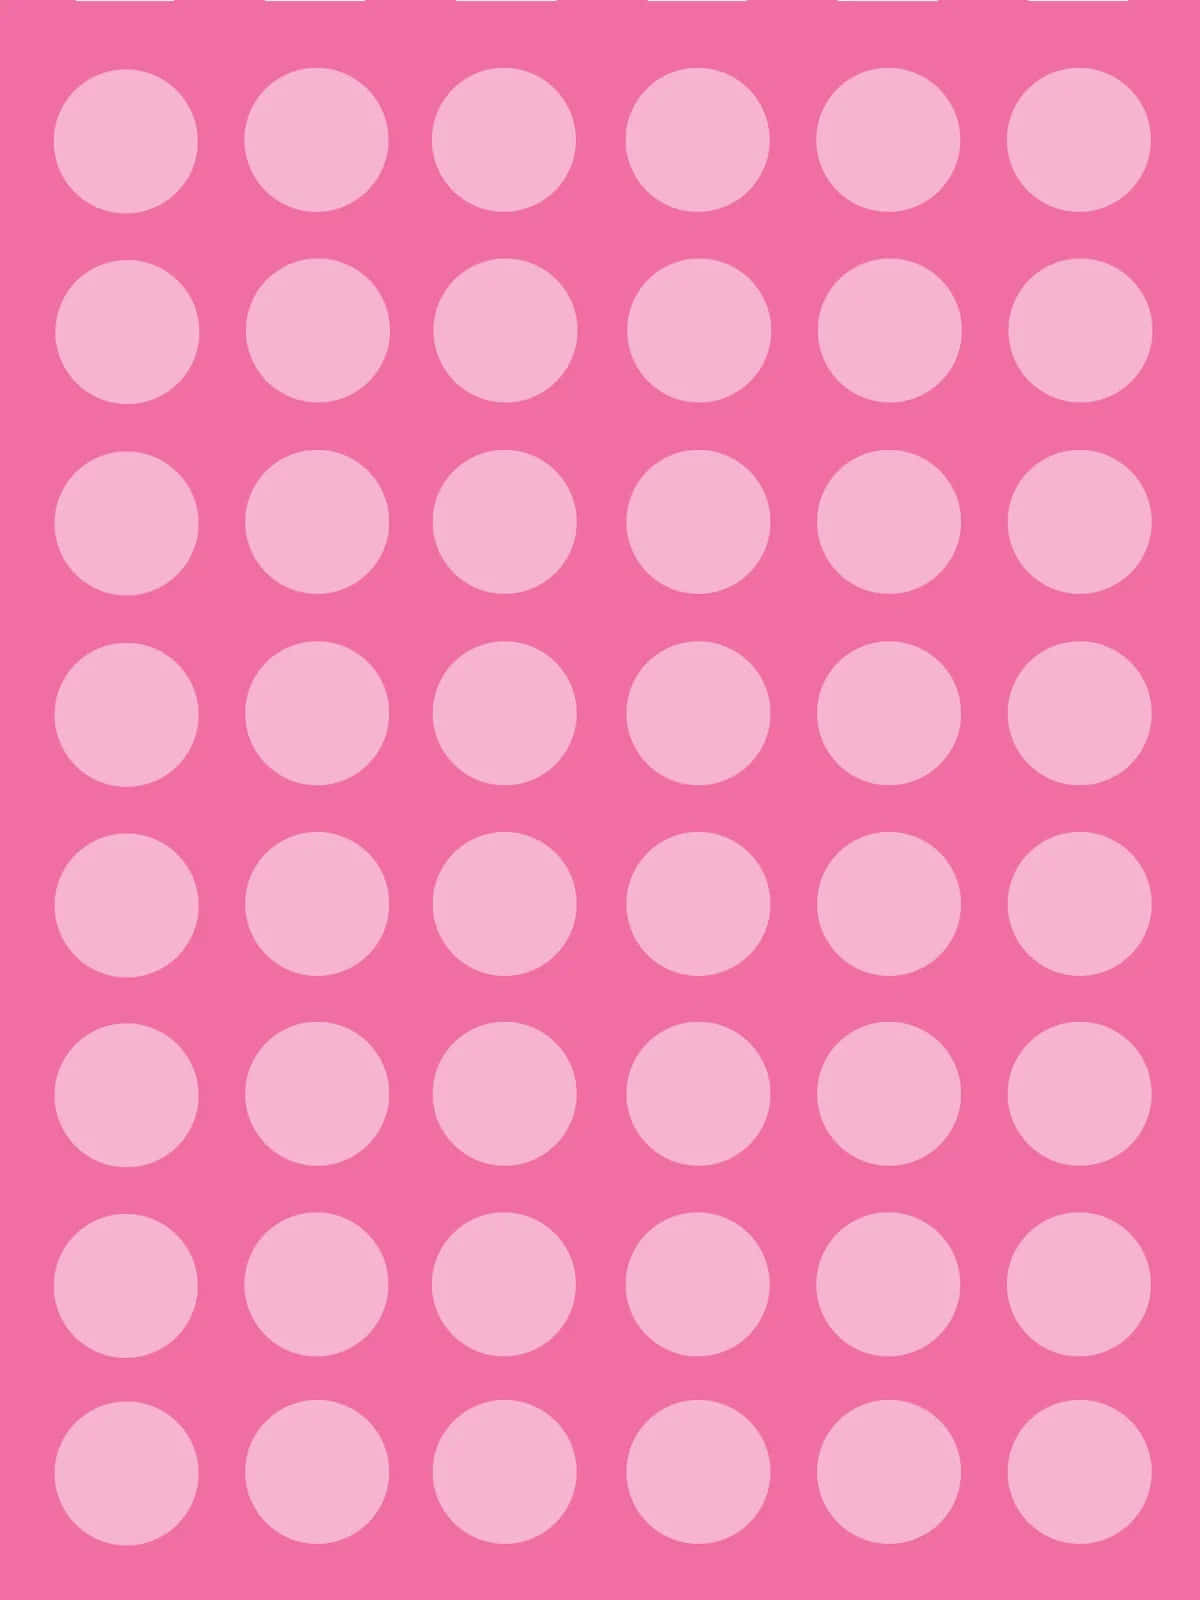 A Pink Background With White Circles